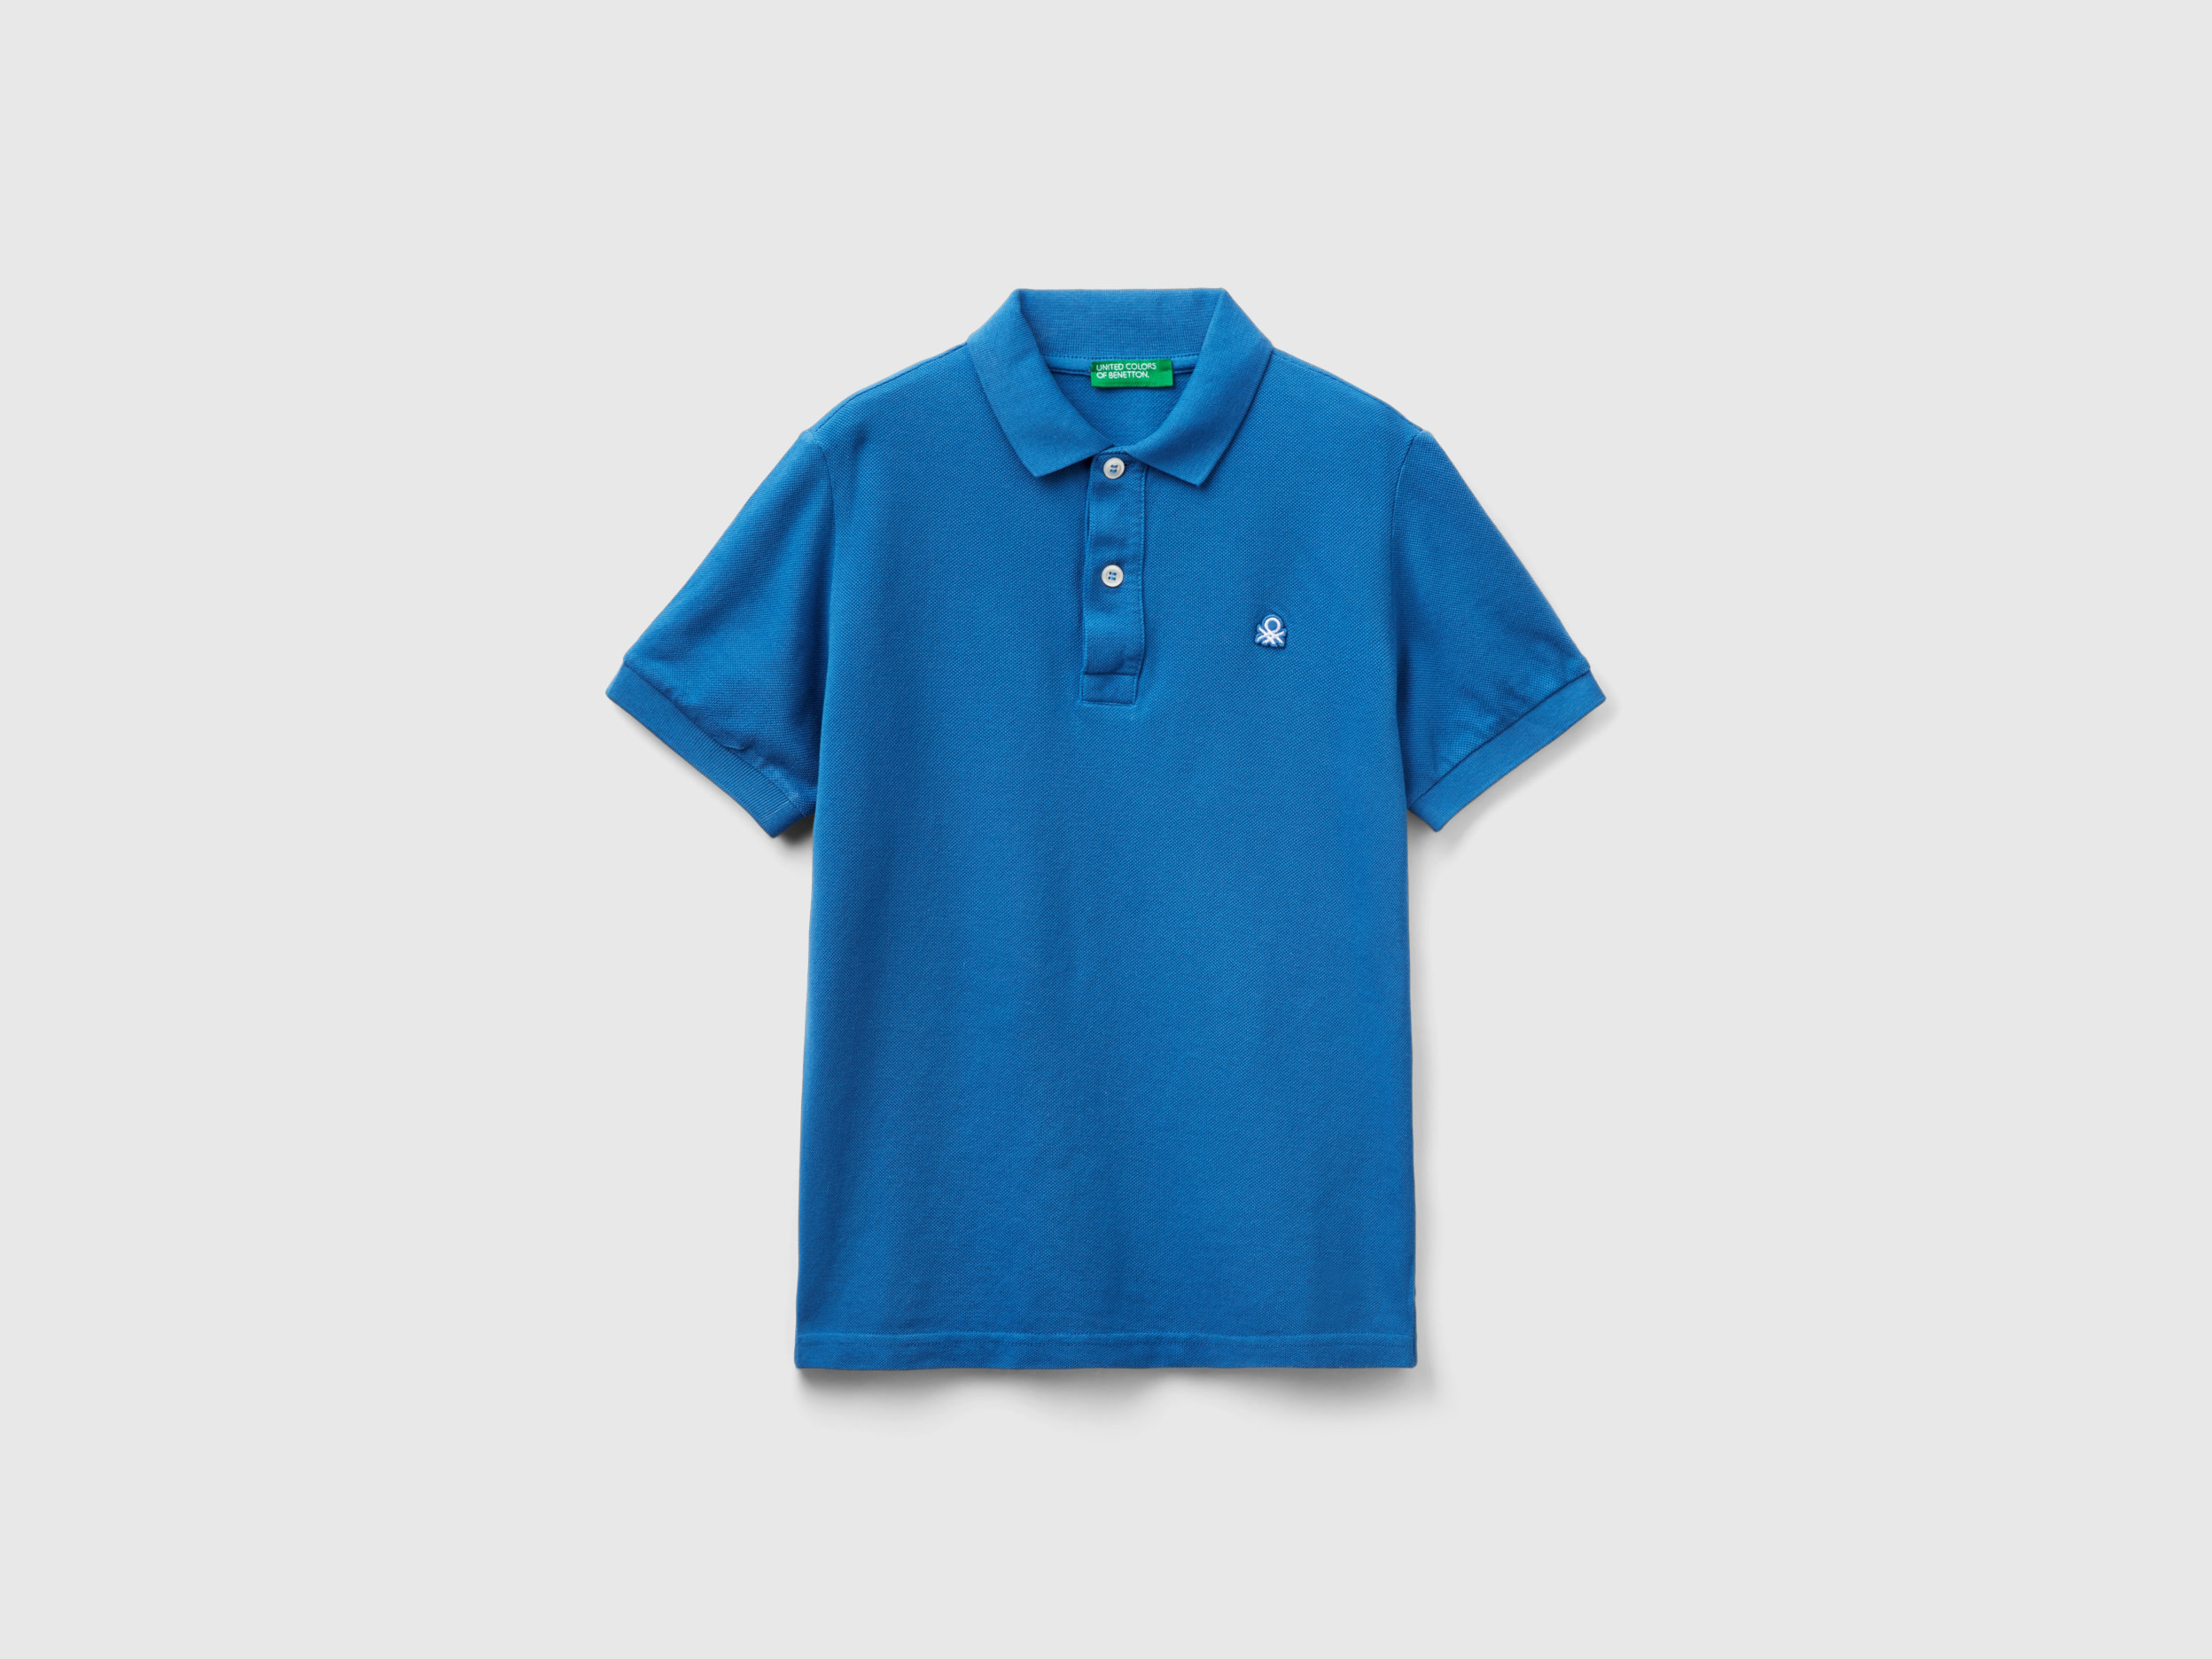 Image of Benetton, Slim Fit Polo In 100% Organic Cotton, size XL, Blue, Kids